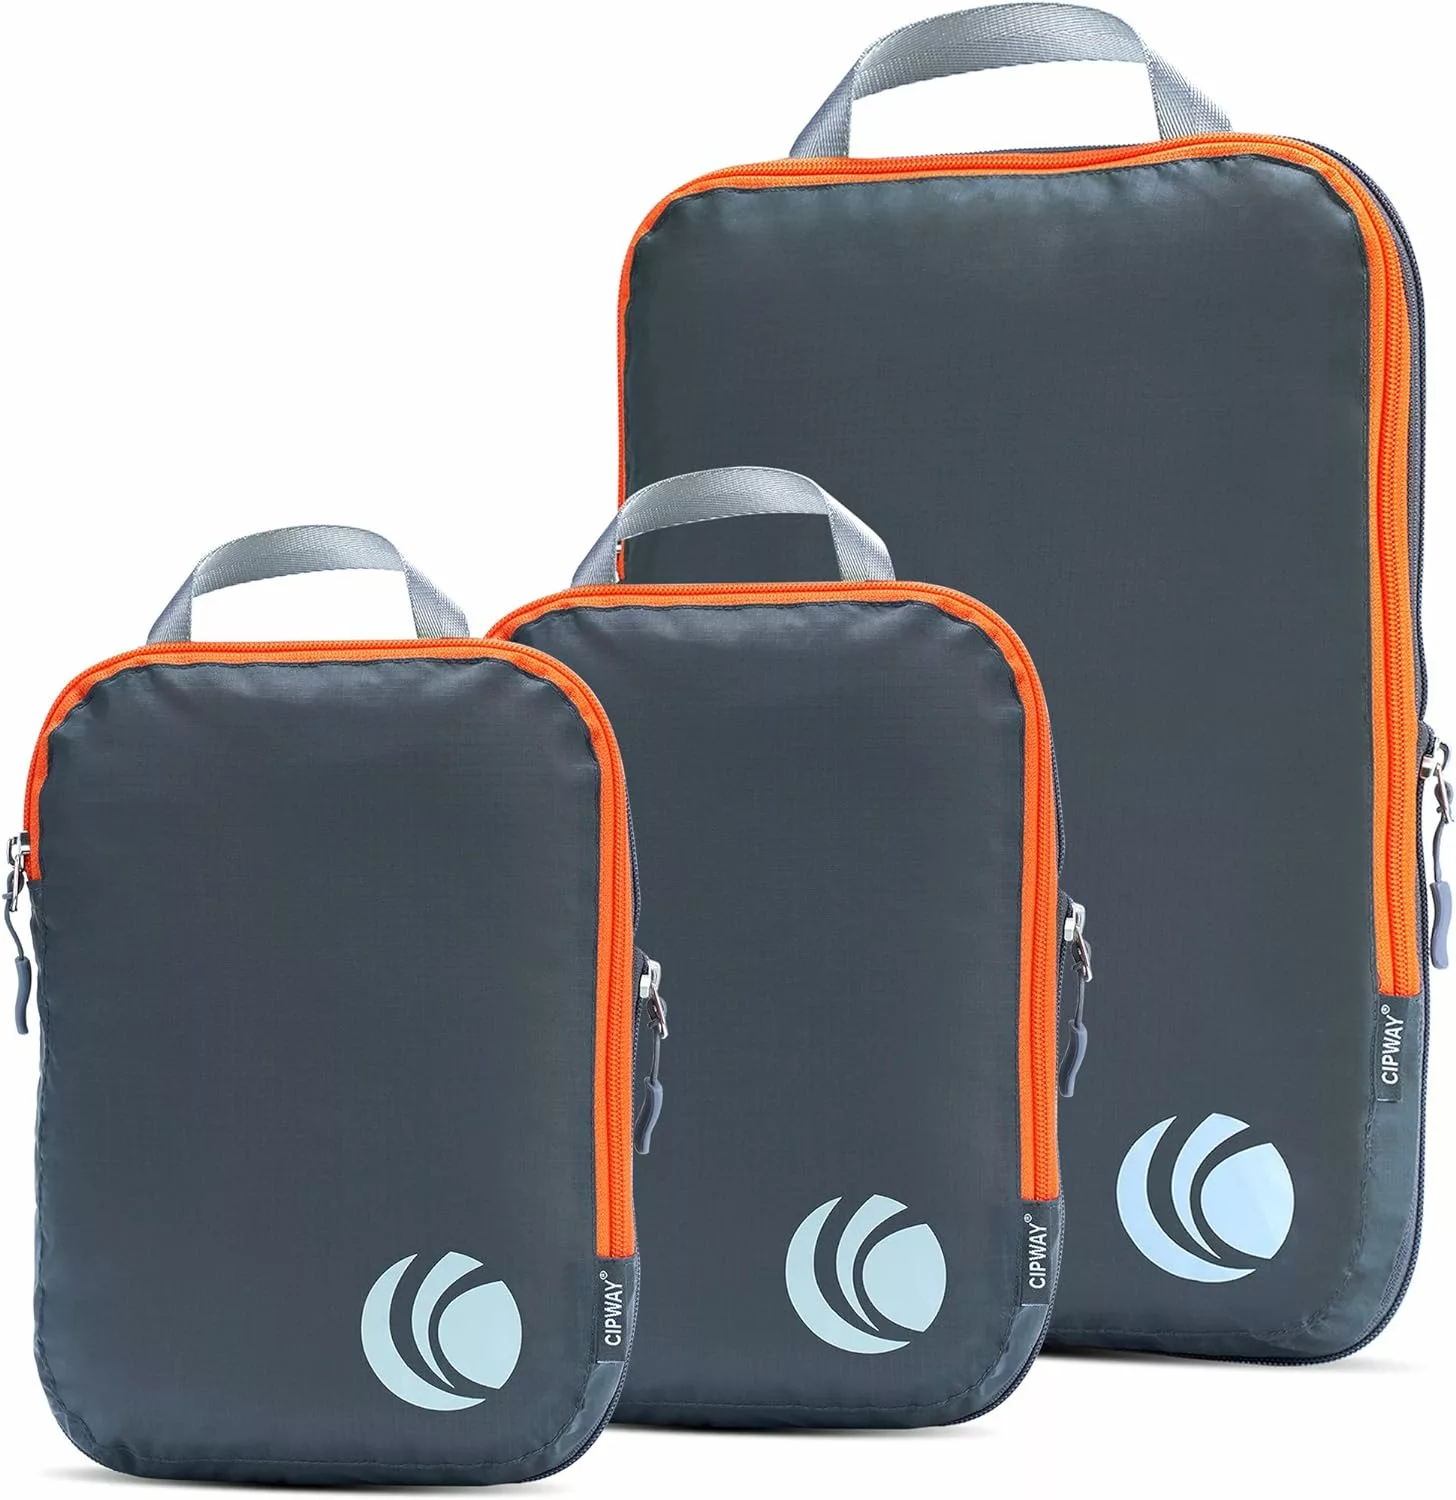 Cipway Compression Packing Cubes Set, Ultralight Expandable Travel Organizers for Carry on Luggage